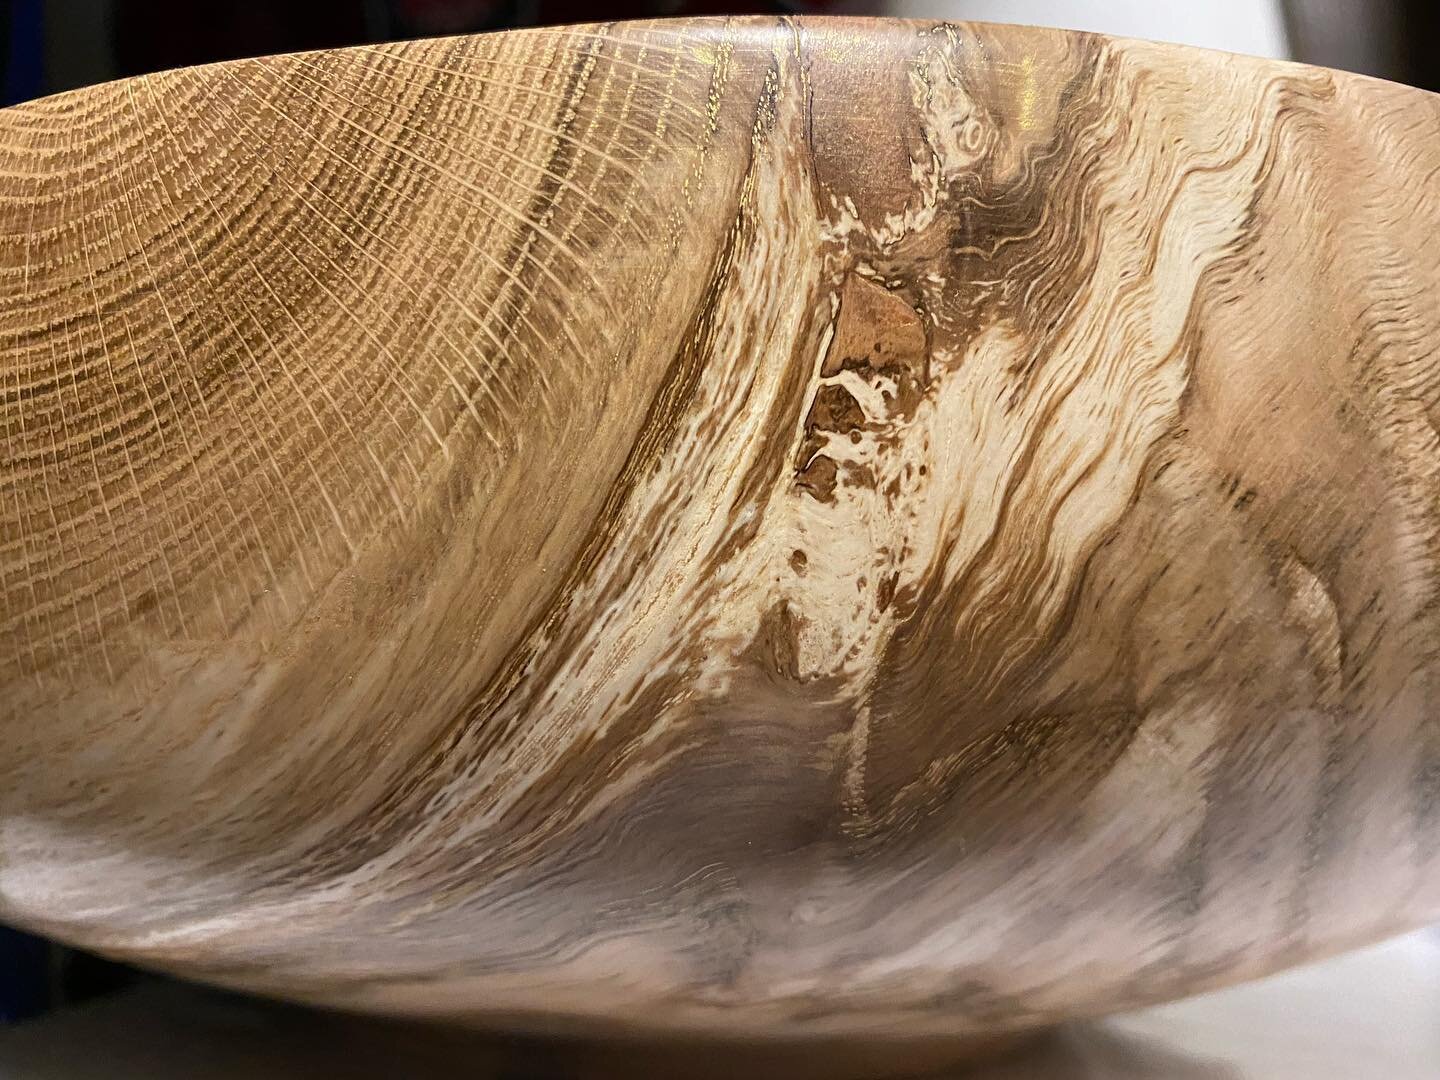 Wood is so neat. I was looking at this red oak bowl I have in my office and I just love the way the grain goes all over the place. Also the ray fleck of oak is always neat. I love woodturning!
.
.⁣
.⁣
#whatwoodyouturn #woodturner #wood #woodcraft #wo